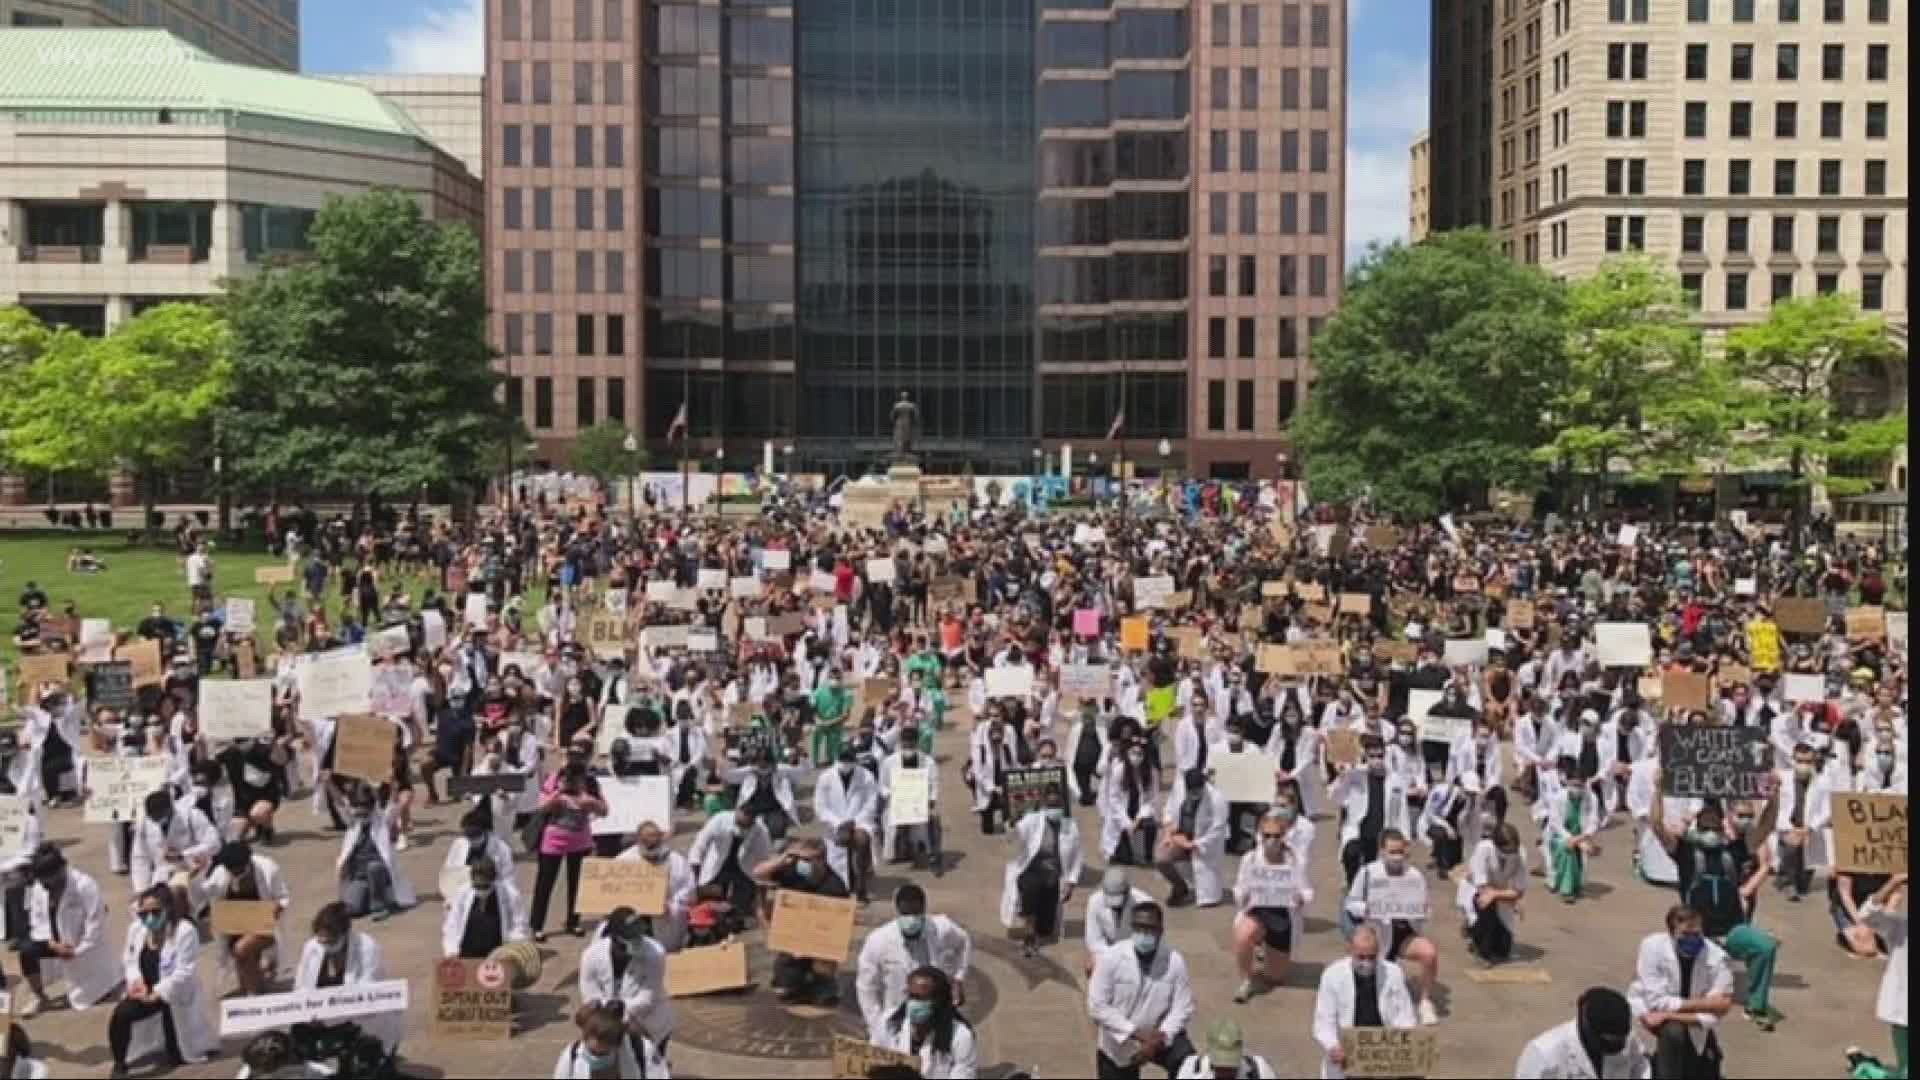 The White Coats for Black Lives observance is a symbol of "unity in the commitment to change." Laura Caso reports.